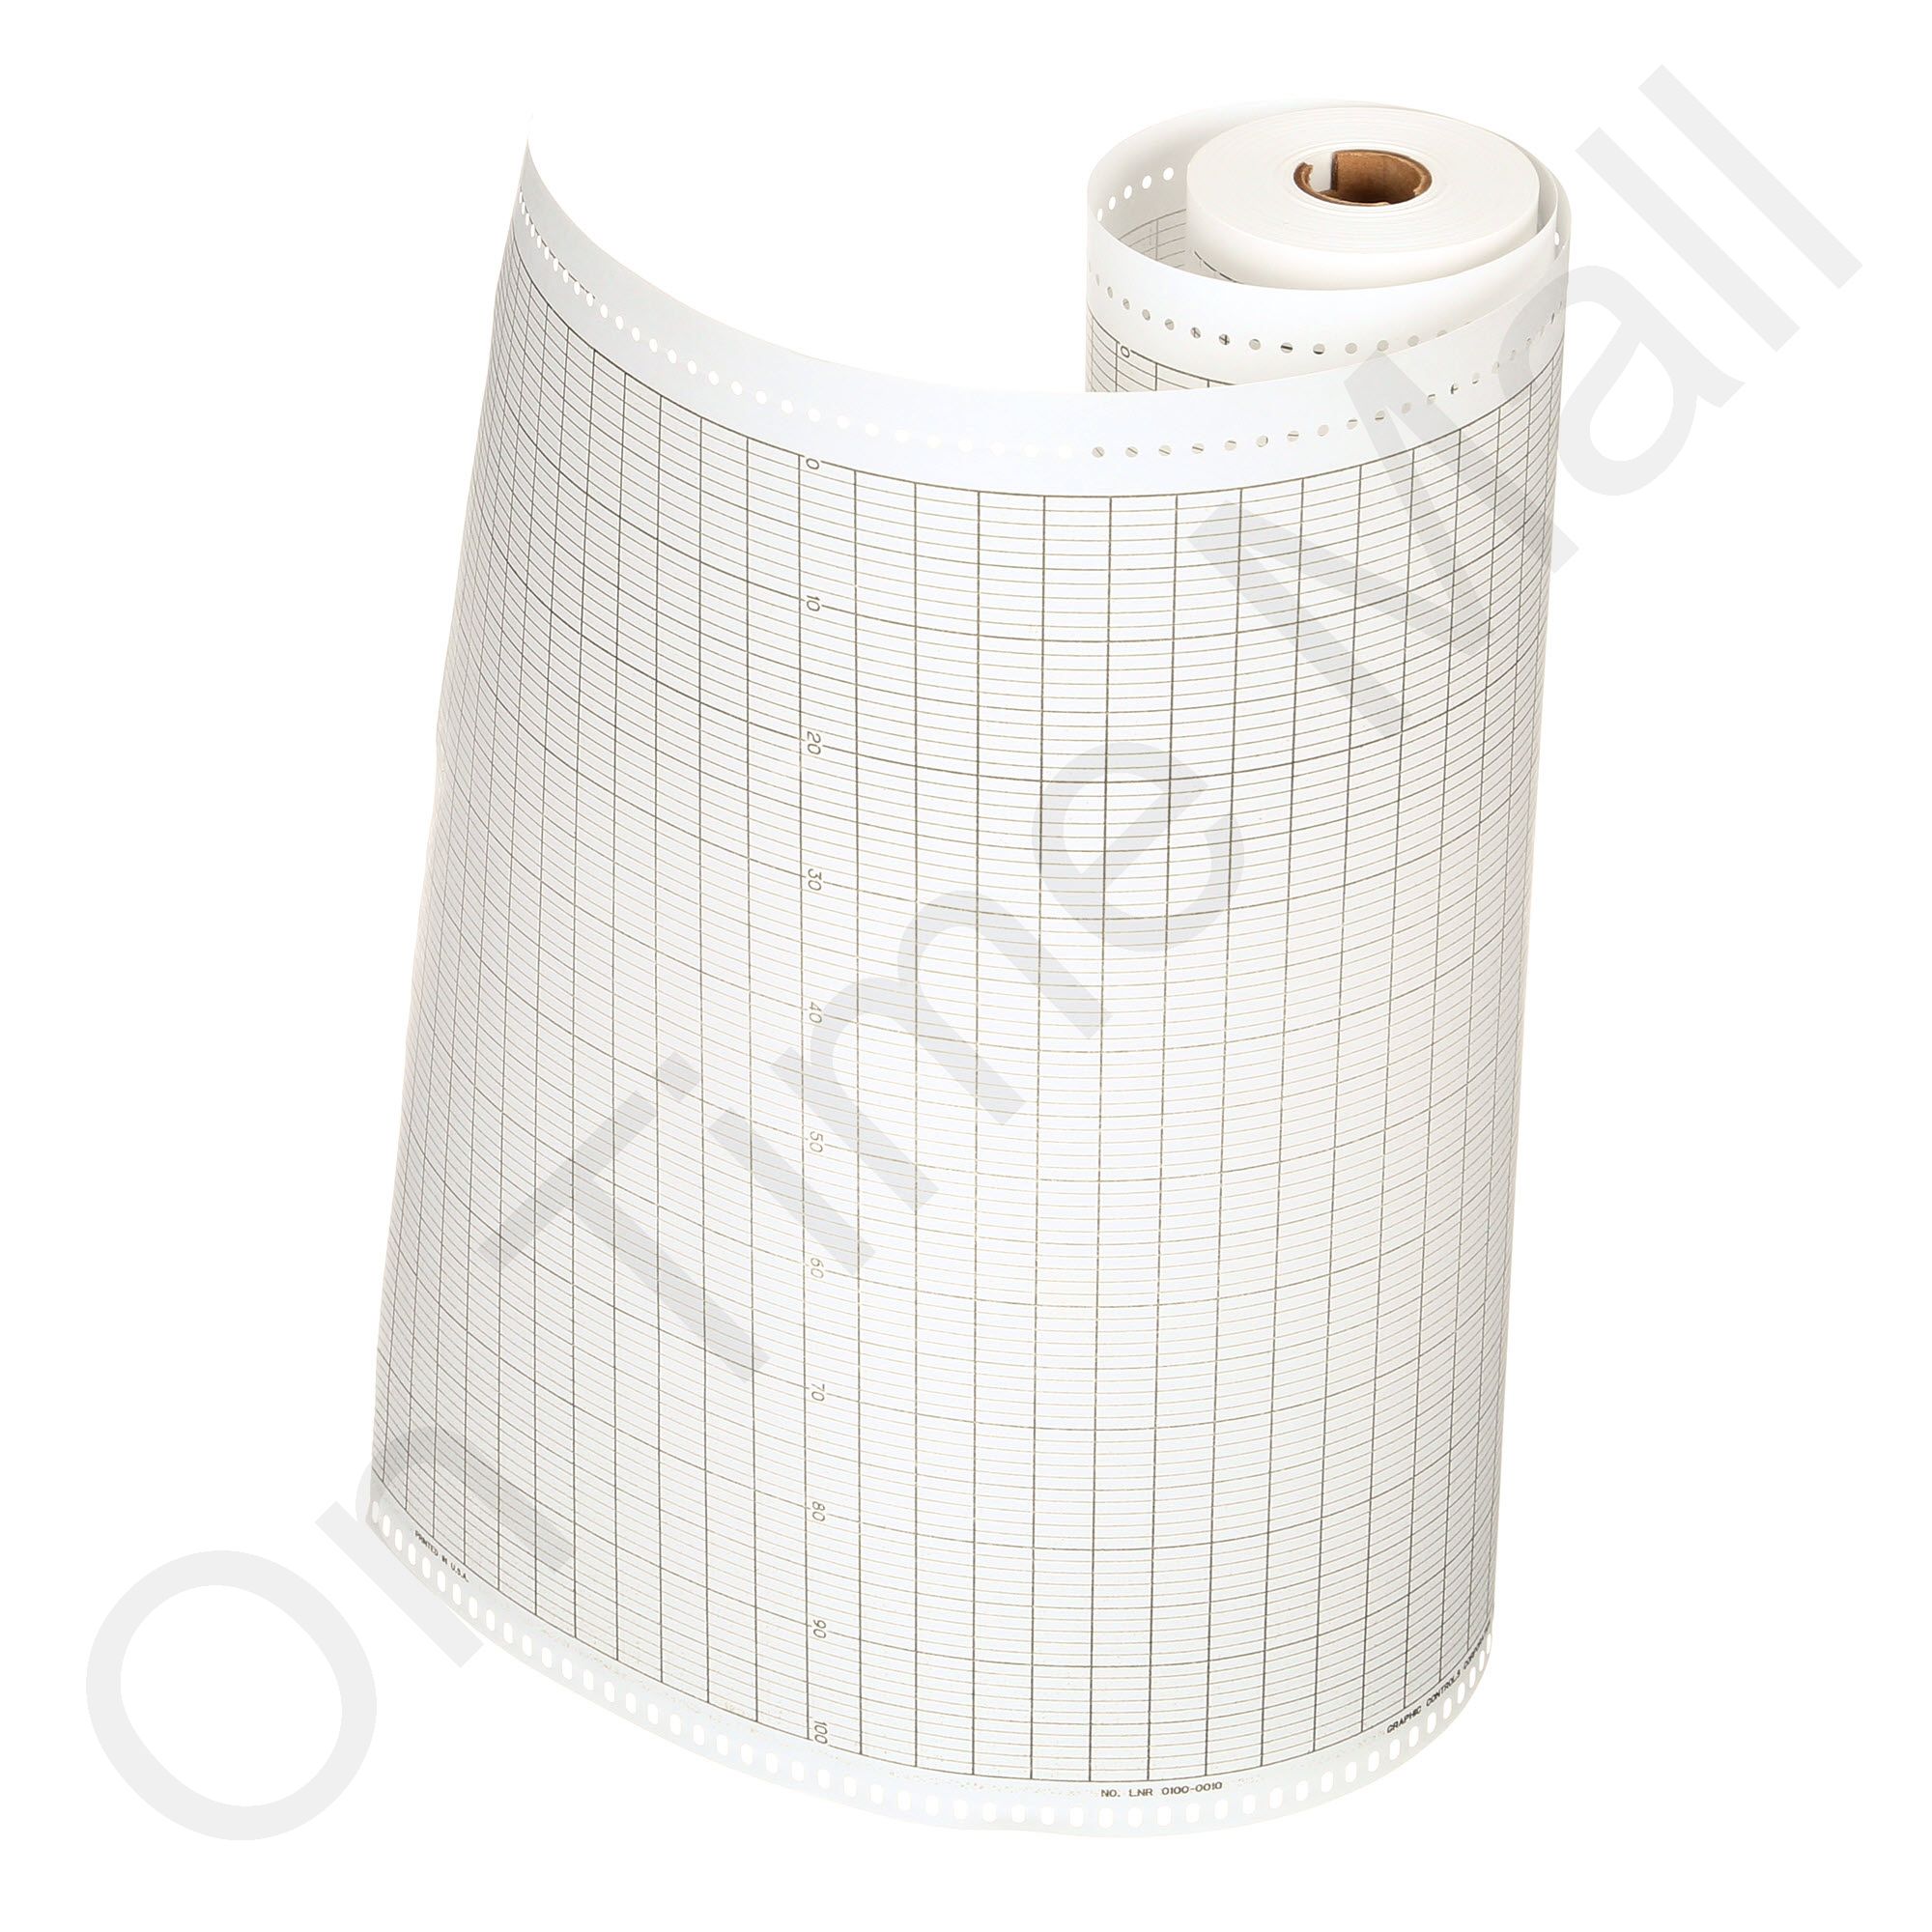 Linear Instruments 01000011 Rolled Charts